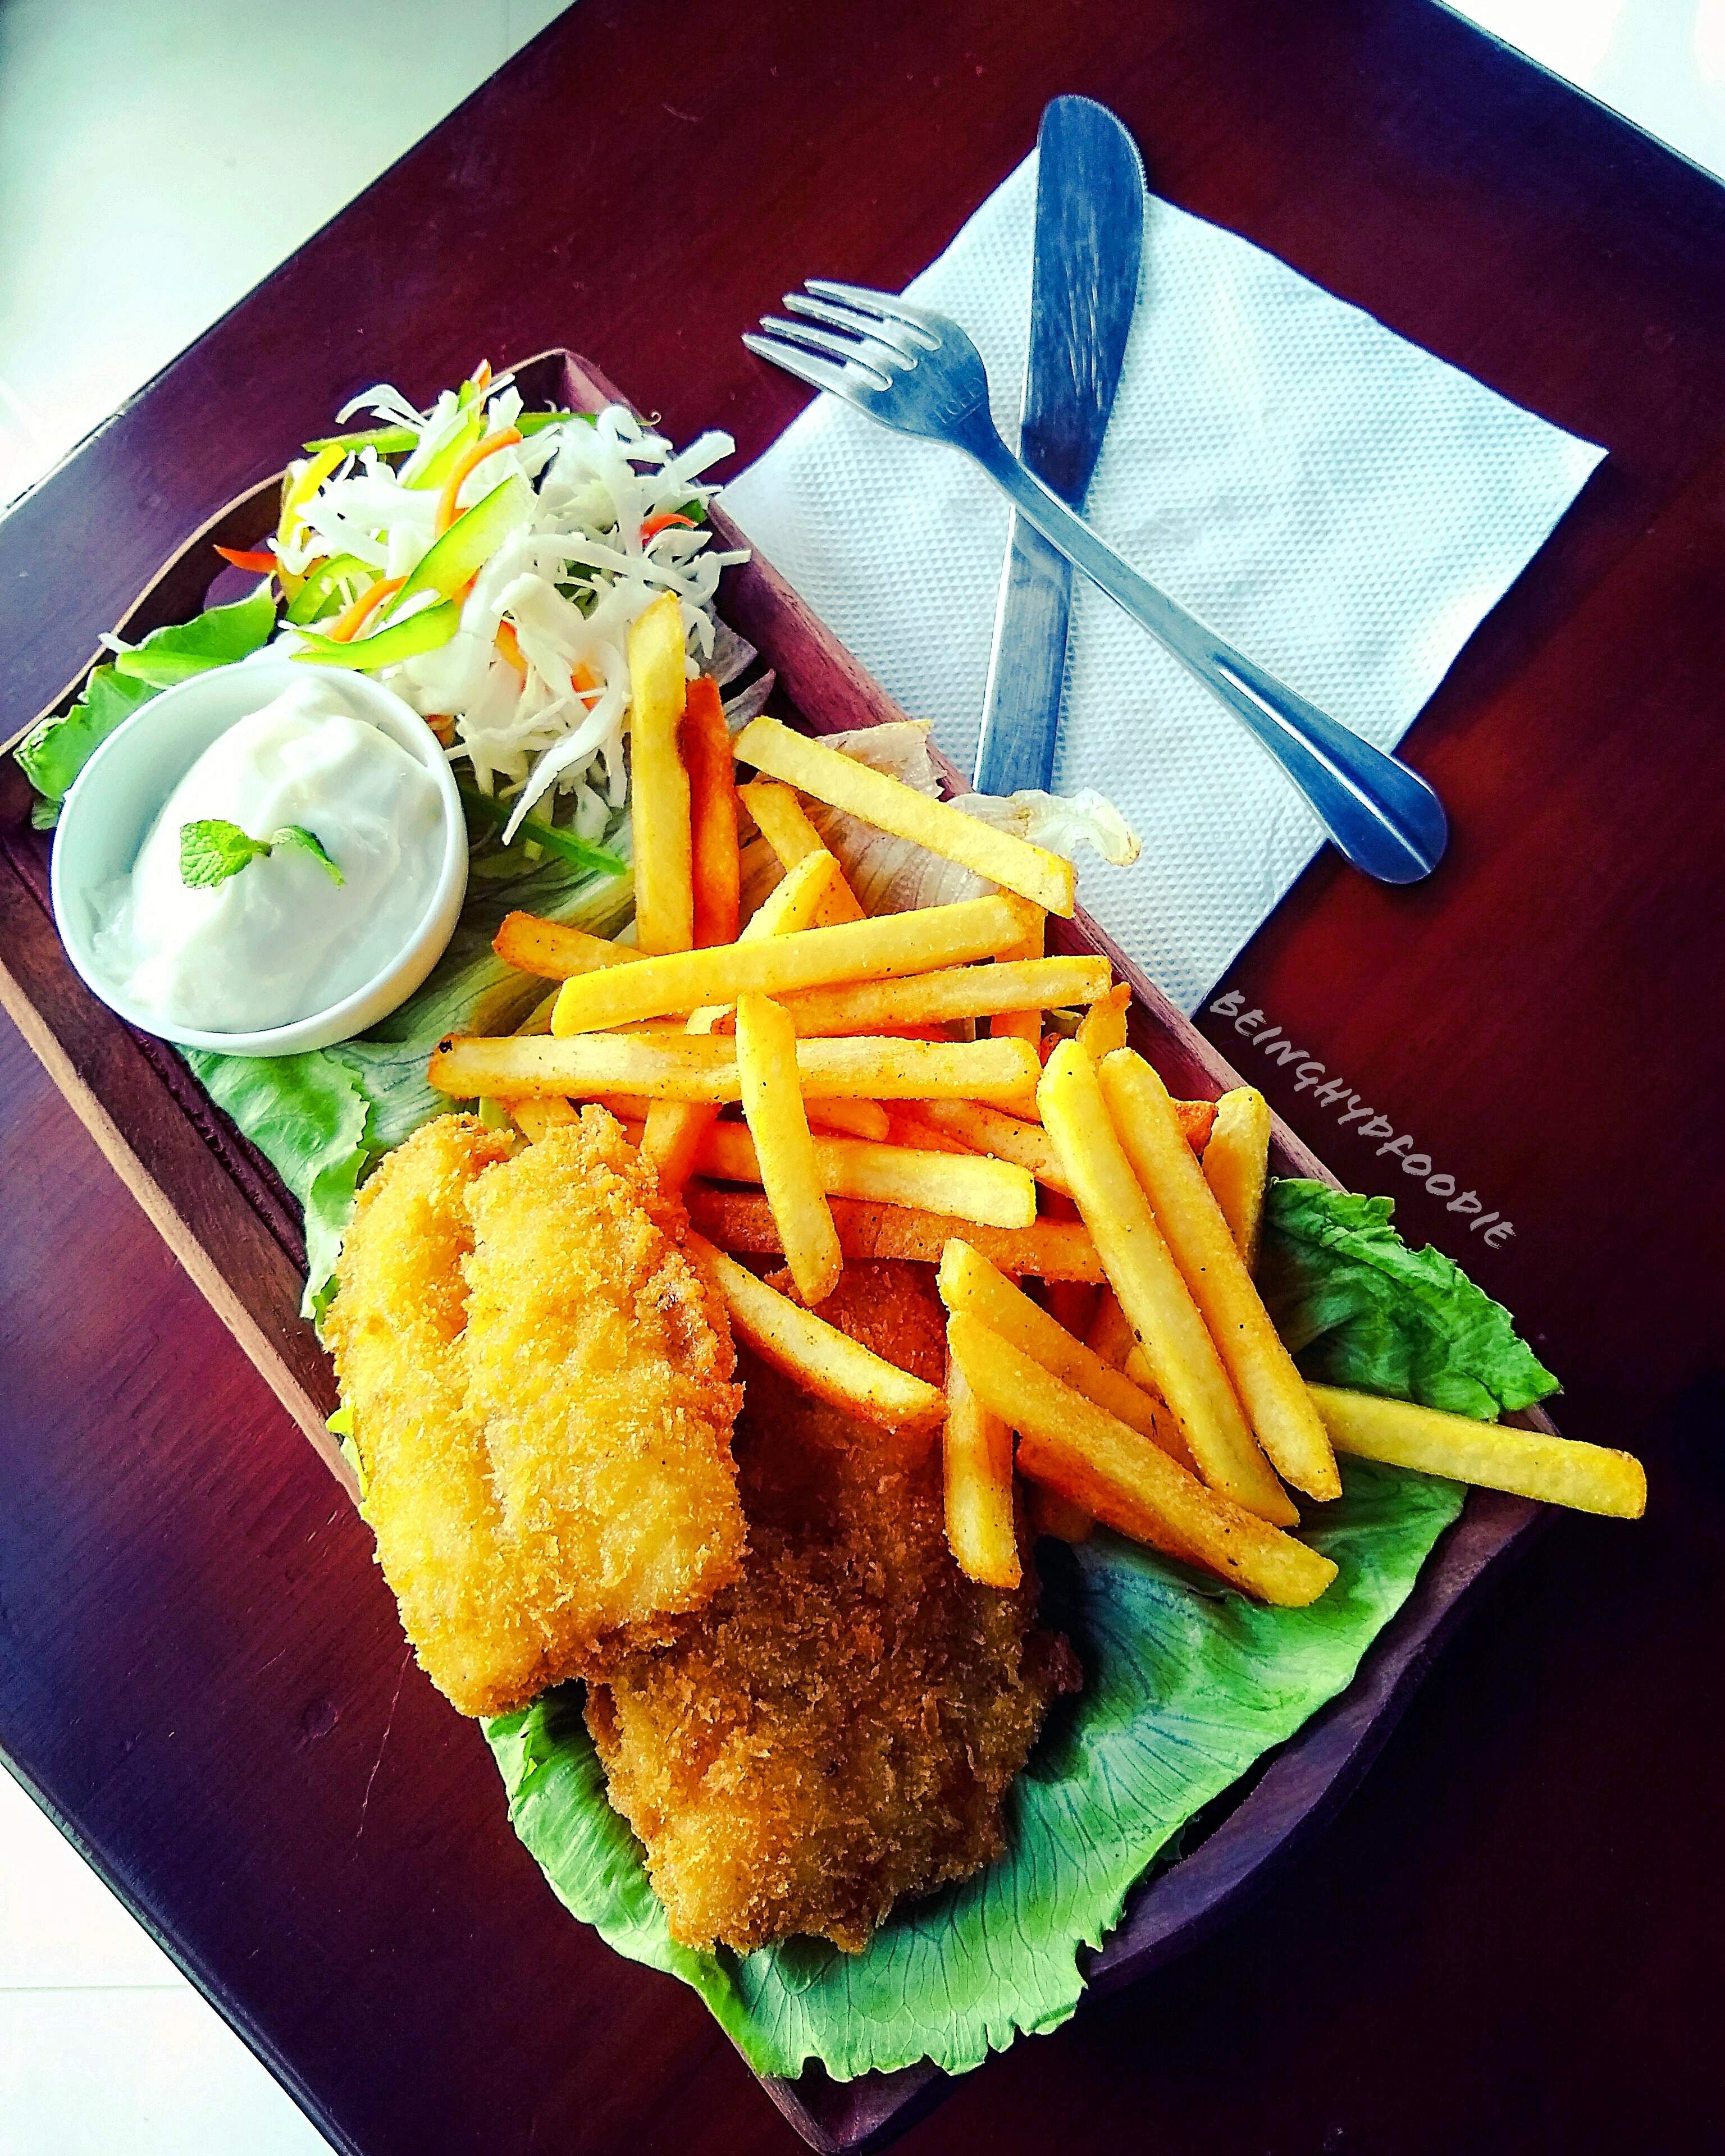 Dish,Food,Fish and chips,Fried food,Cuisine,Ingredient,French fries,Deep frying,Fast food,Side dish